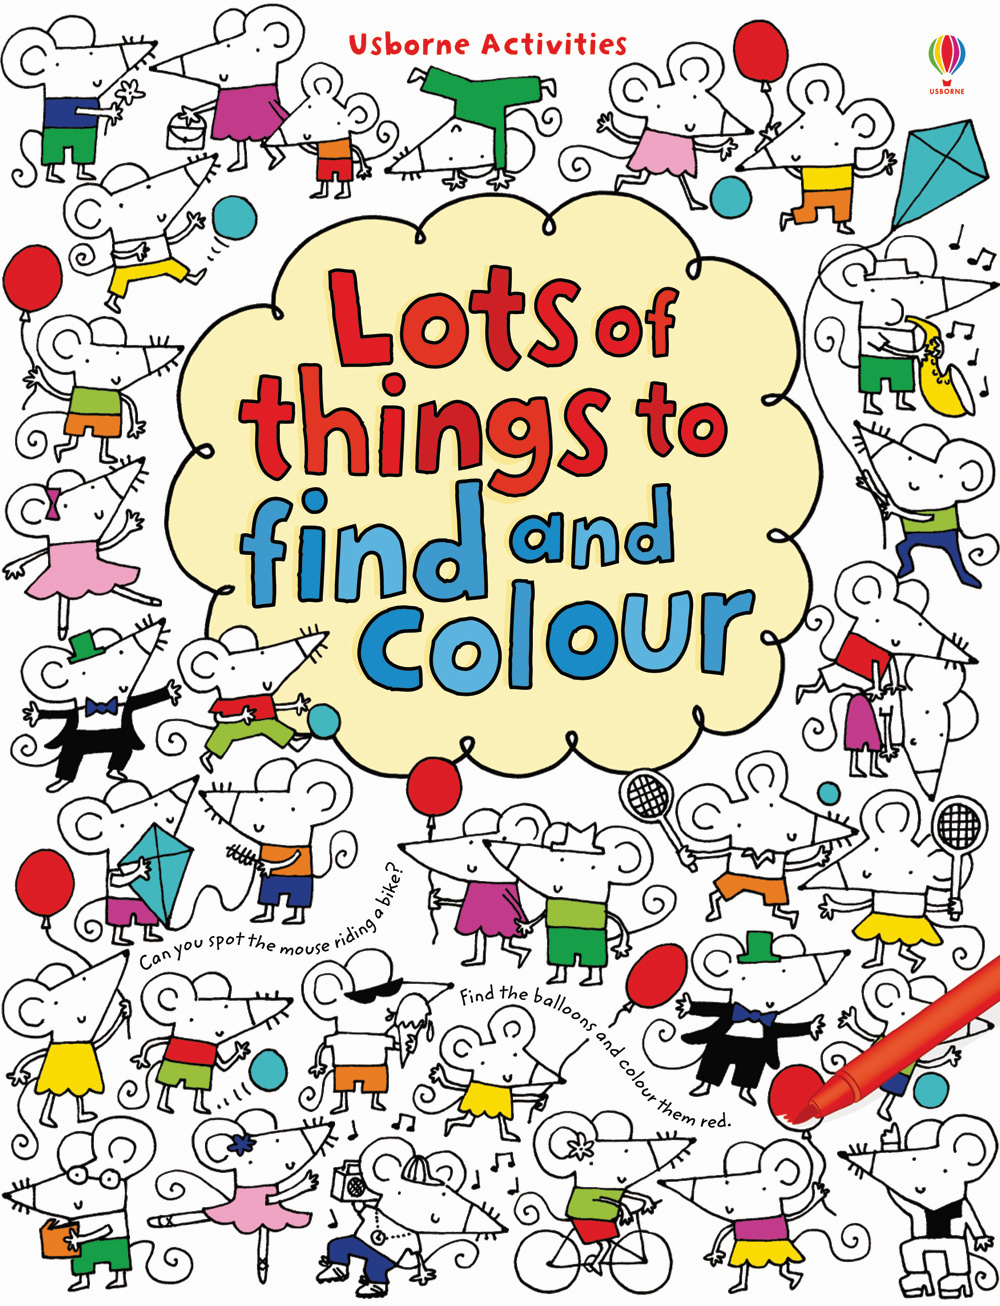 Lots of things to find and colour. Ediz. illustrata